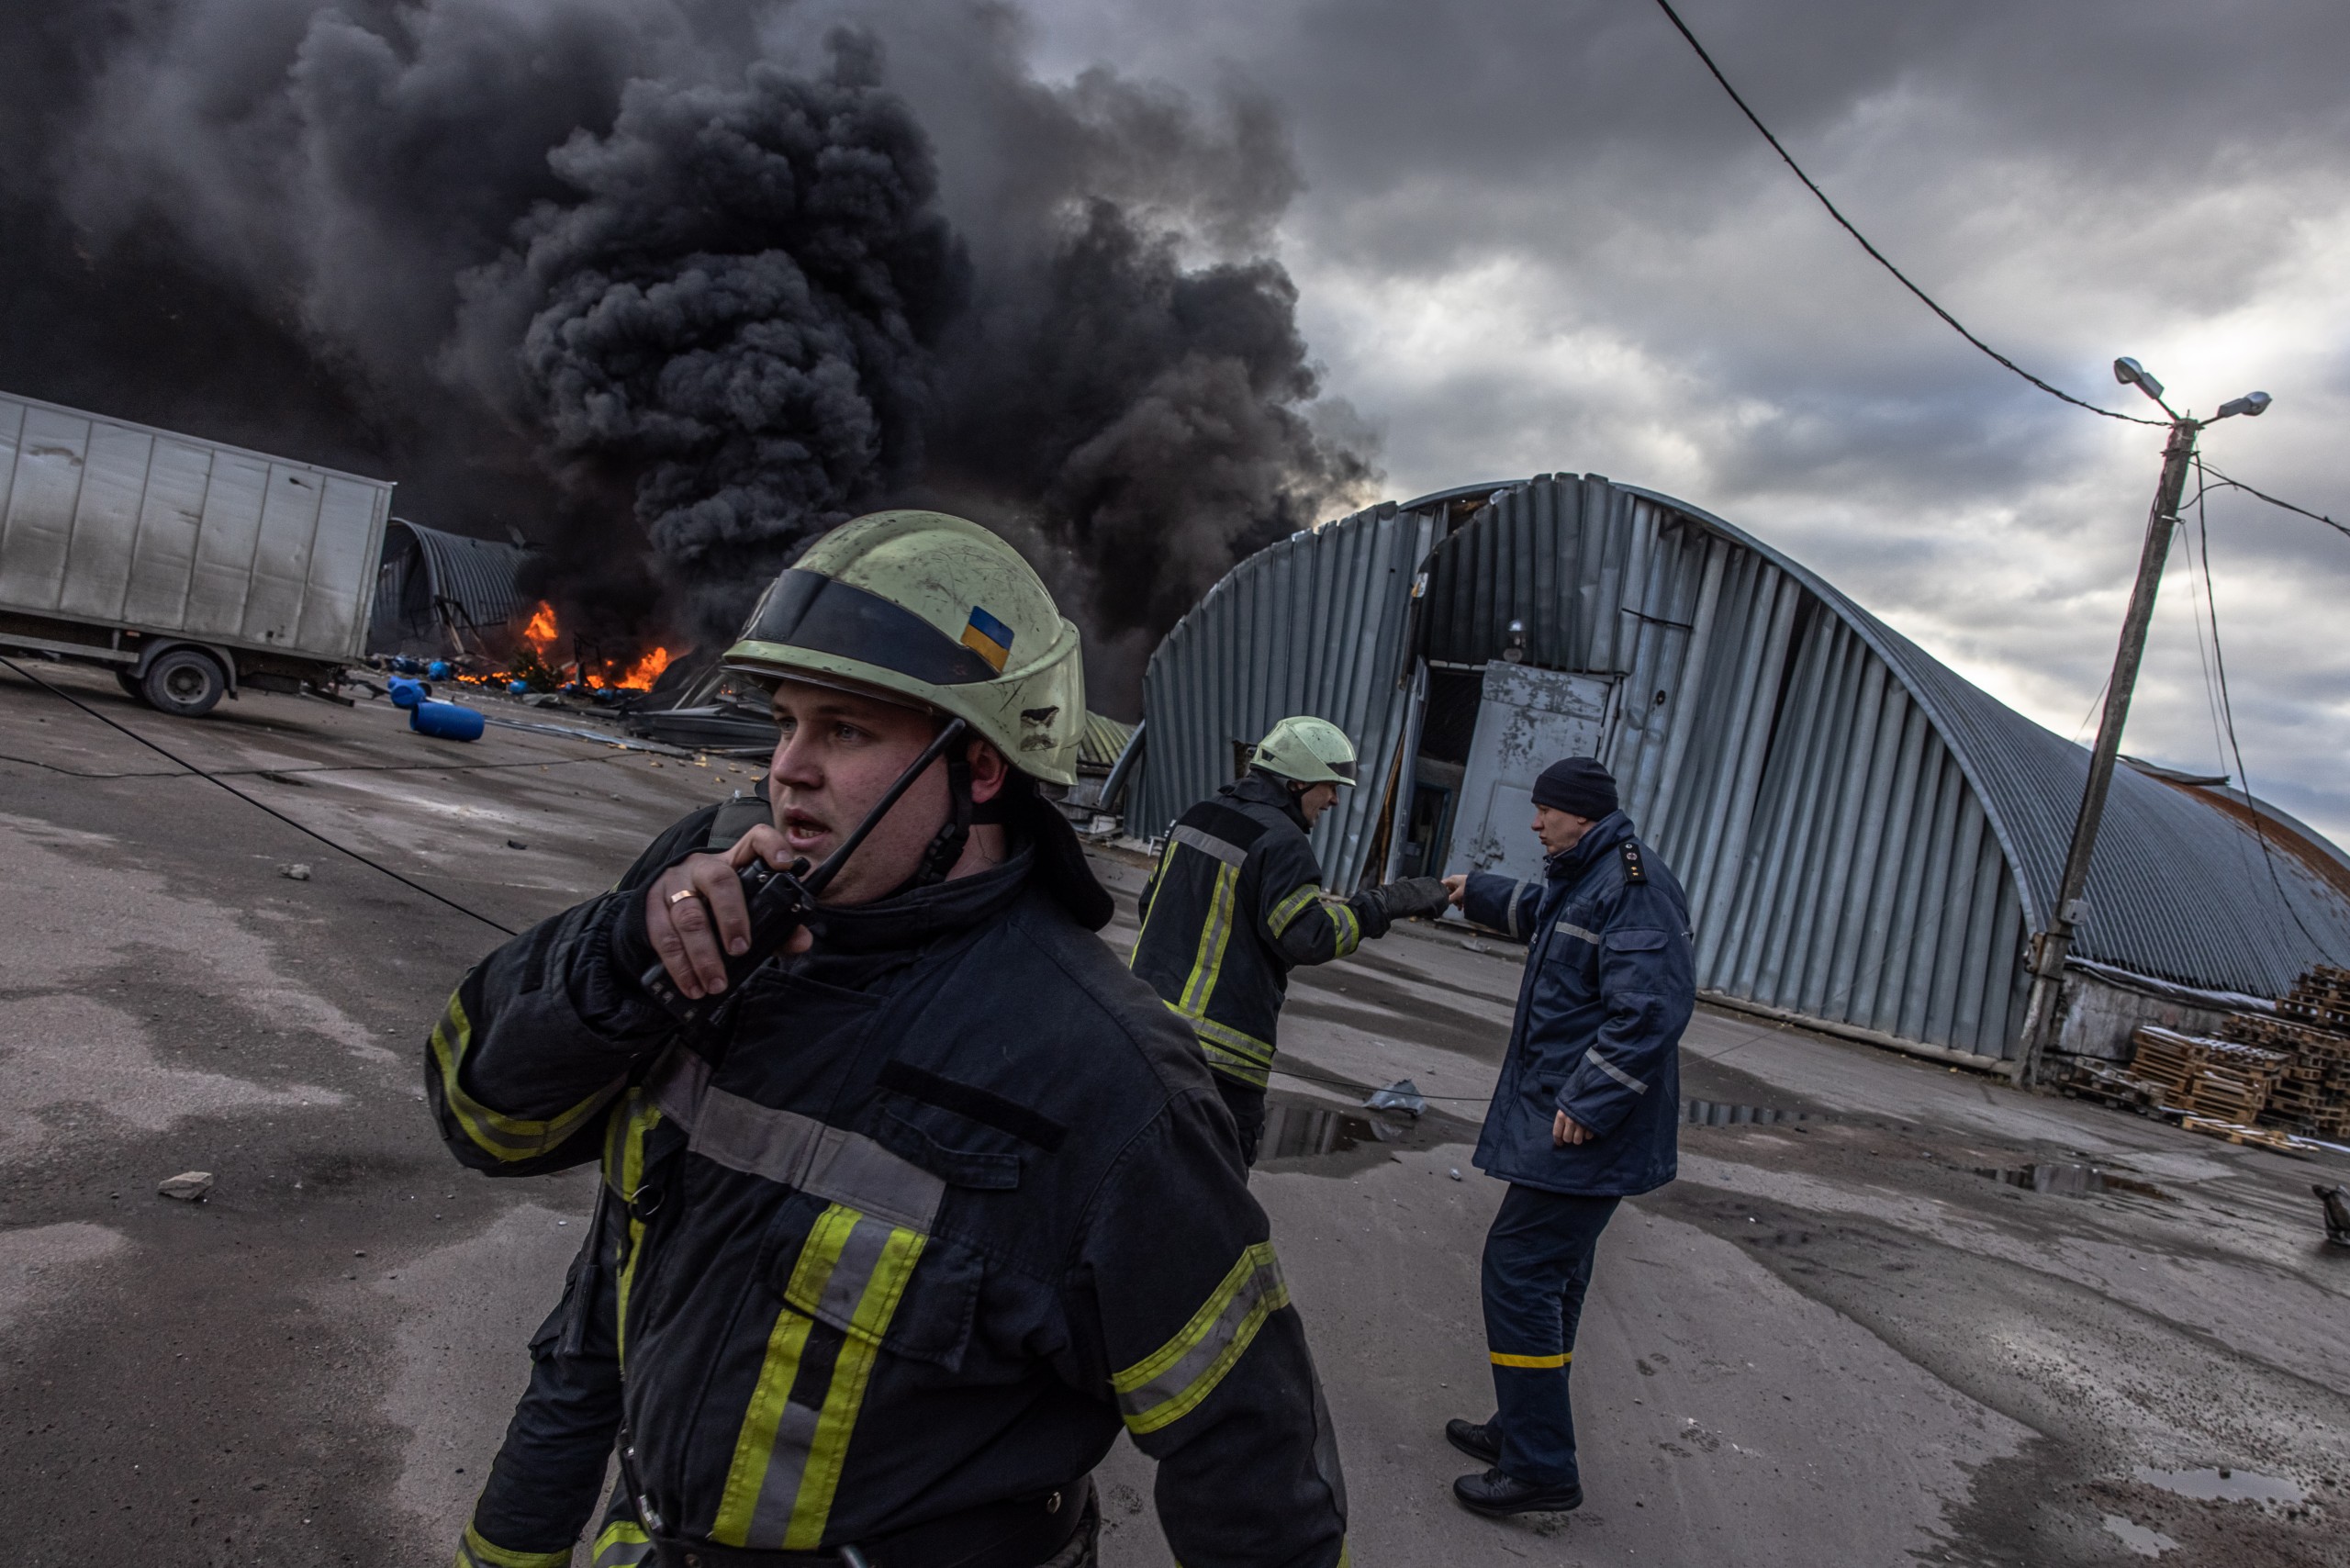 epa09810337 Firefighters in action trying to extinguish the fire at the storage with chemicals which was shelled, on the outskirts of Brovary, the eastern frontline of Kyiv (Kiev) region, Ukraine, 08 March 2022. According to the United Nations High Commissioner for Refugees (UNHCR), Russia's military invasion of Ukraine, which started on 24 February, has destroyed civilian infrastructure and caused civilian casualties, leaving tens of thousands internally displaced and over two million refugees fleeing the country.  EPA/ROMAN PILIPEY